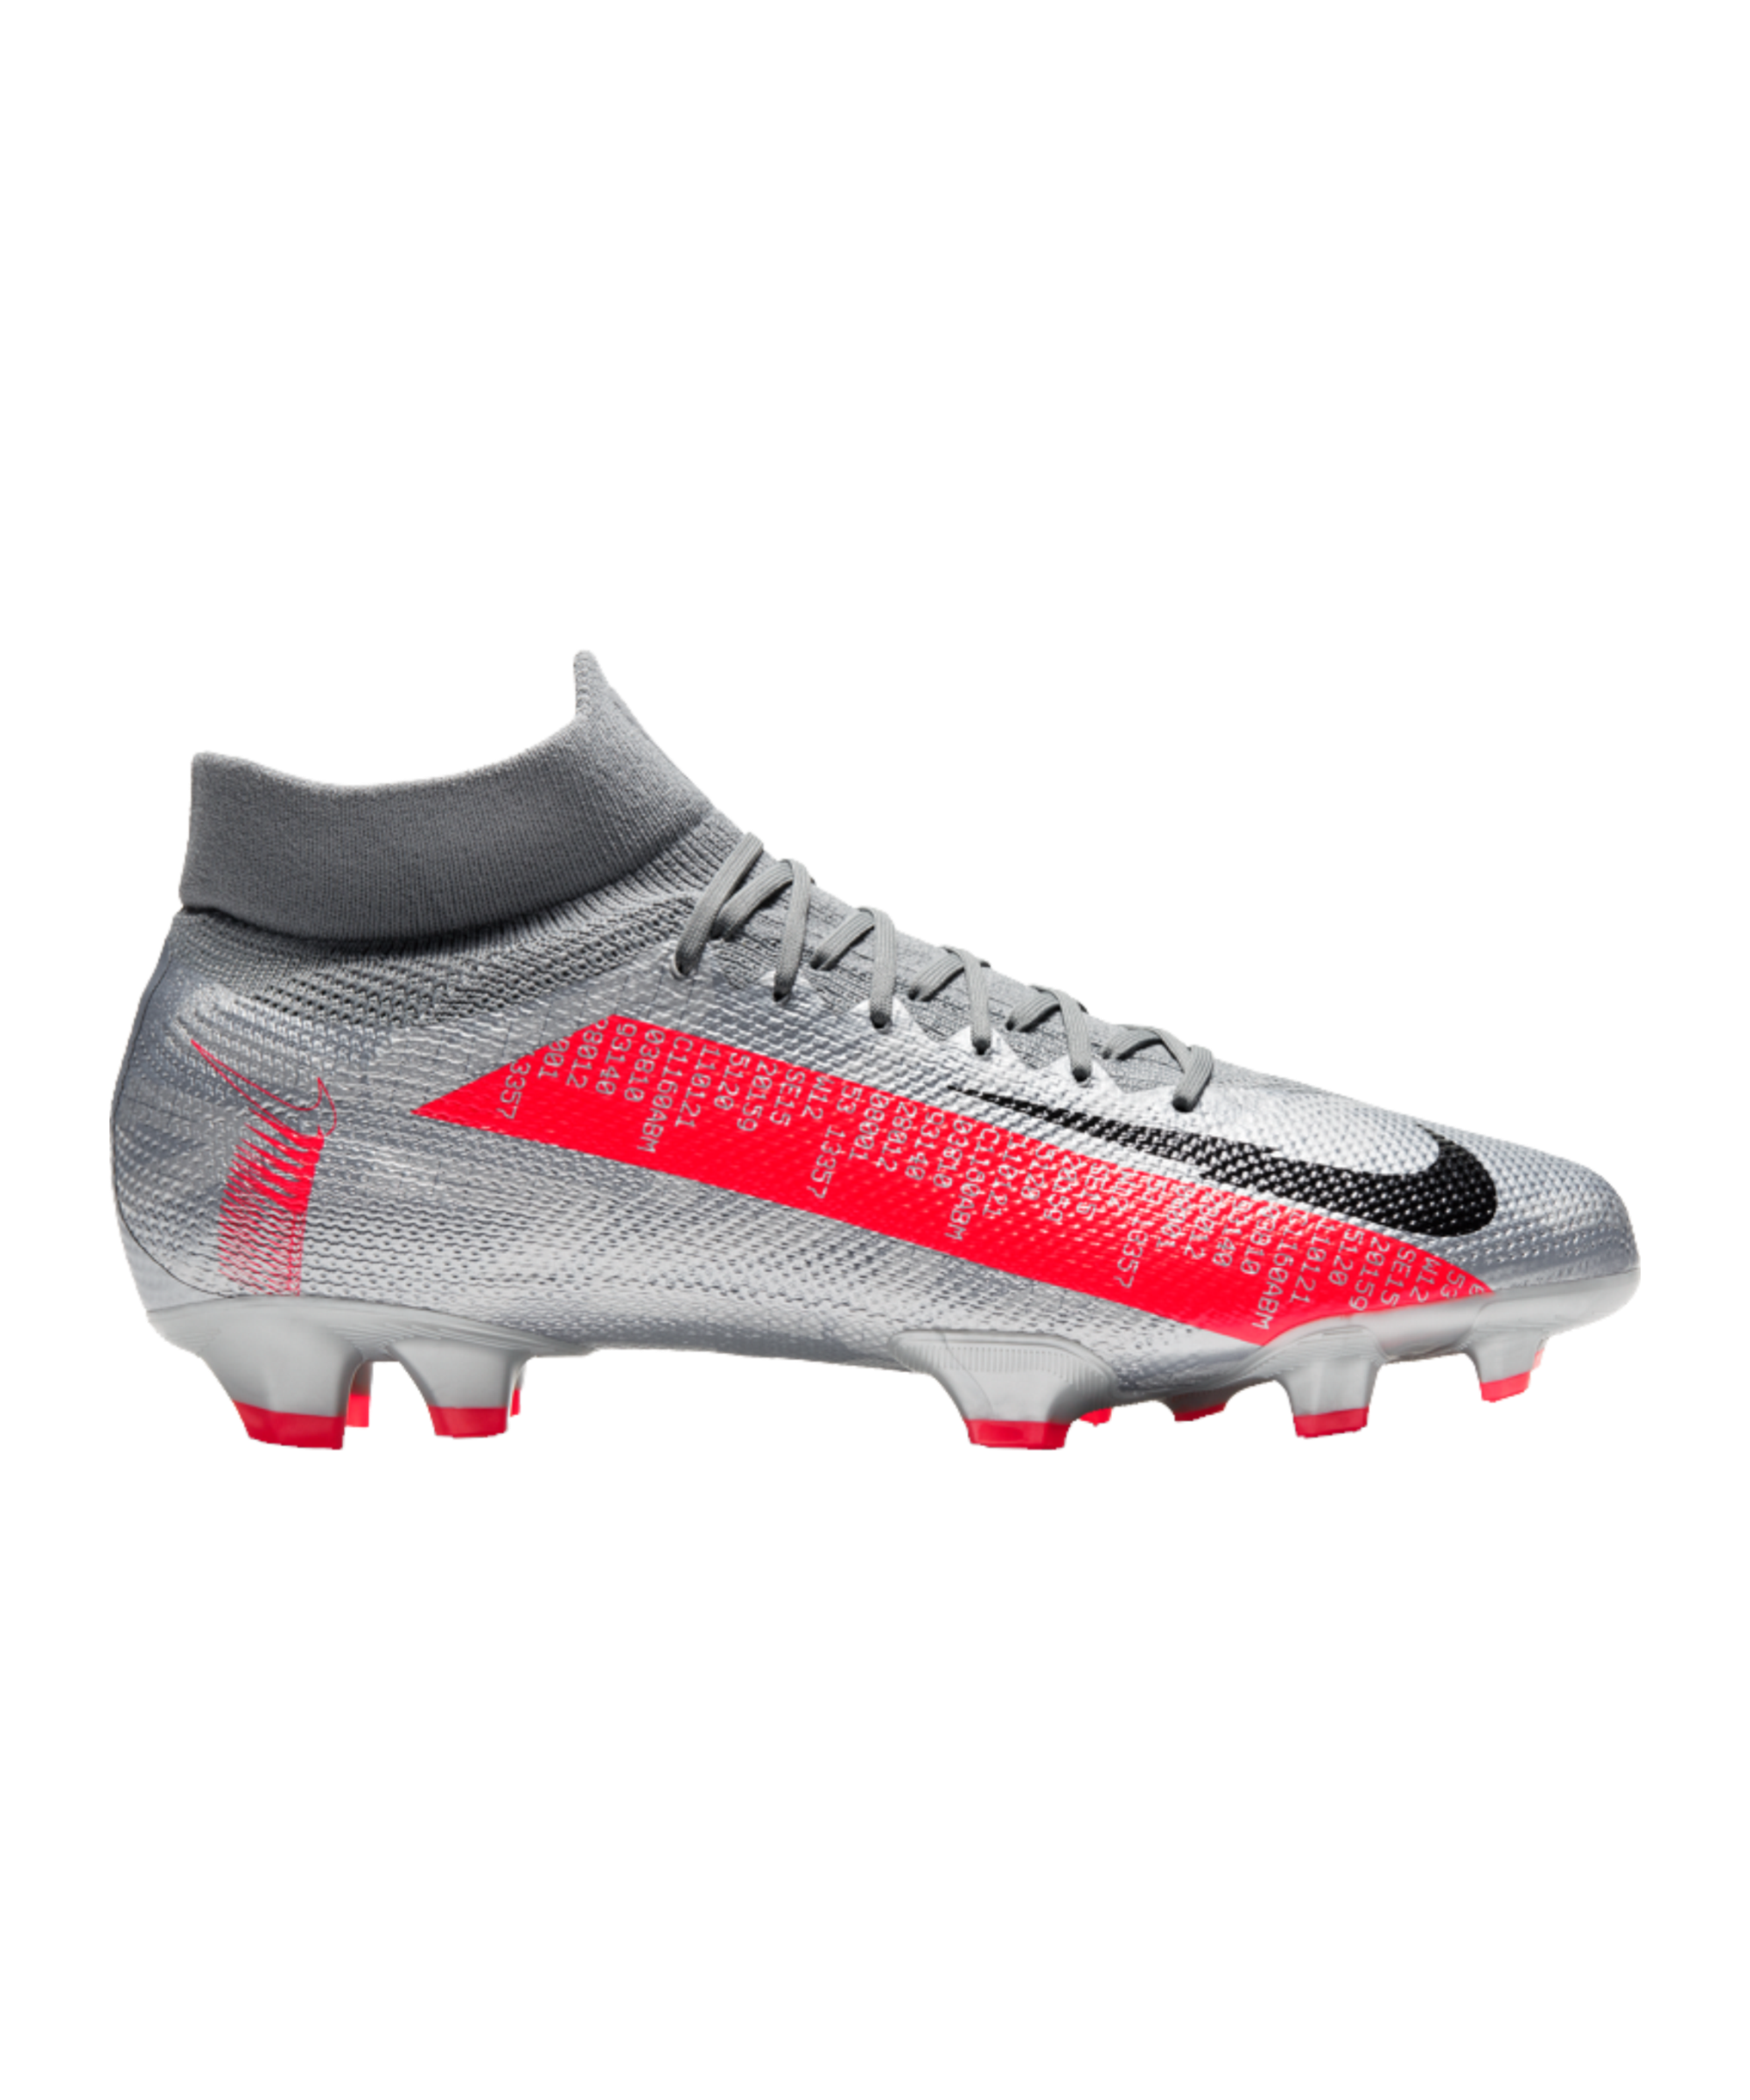 Nike Mercurial Superfly 6 Pro FG Soccer Cleats Black Mens